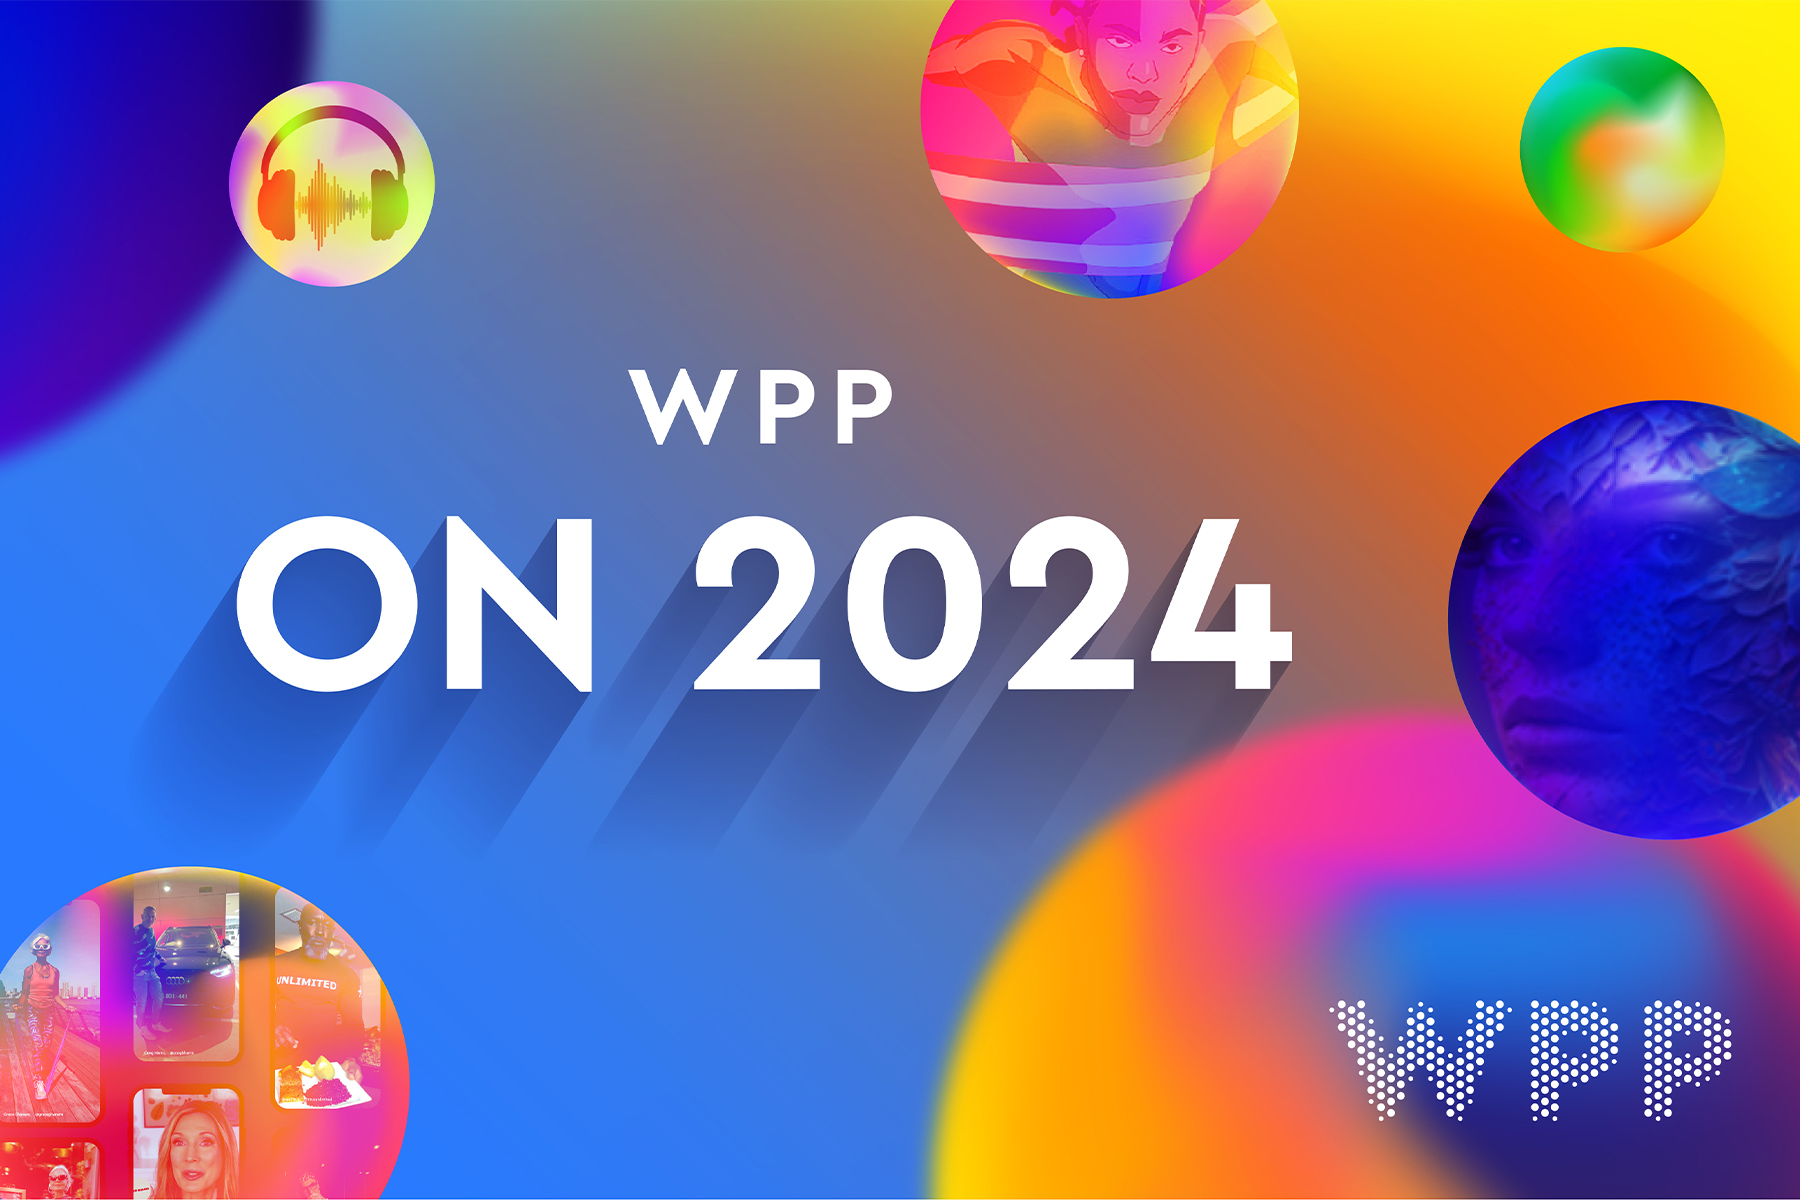 Colourful background with orbs and copy that reads WPP on 2024